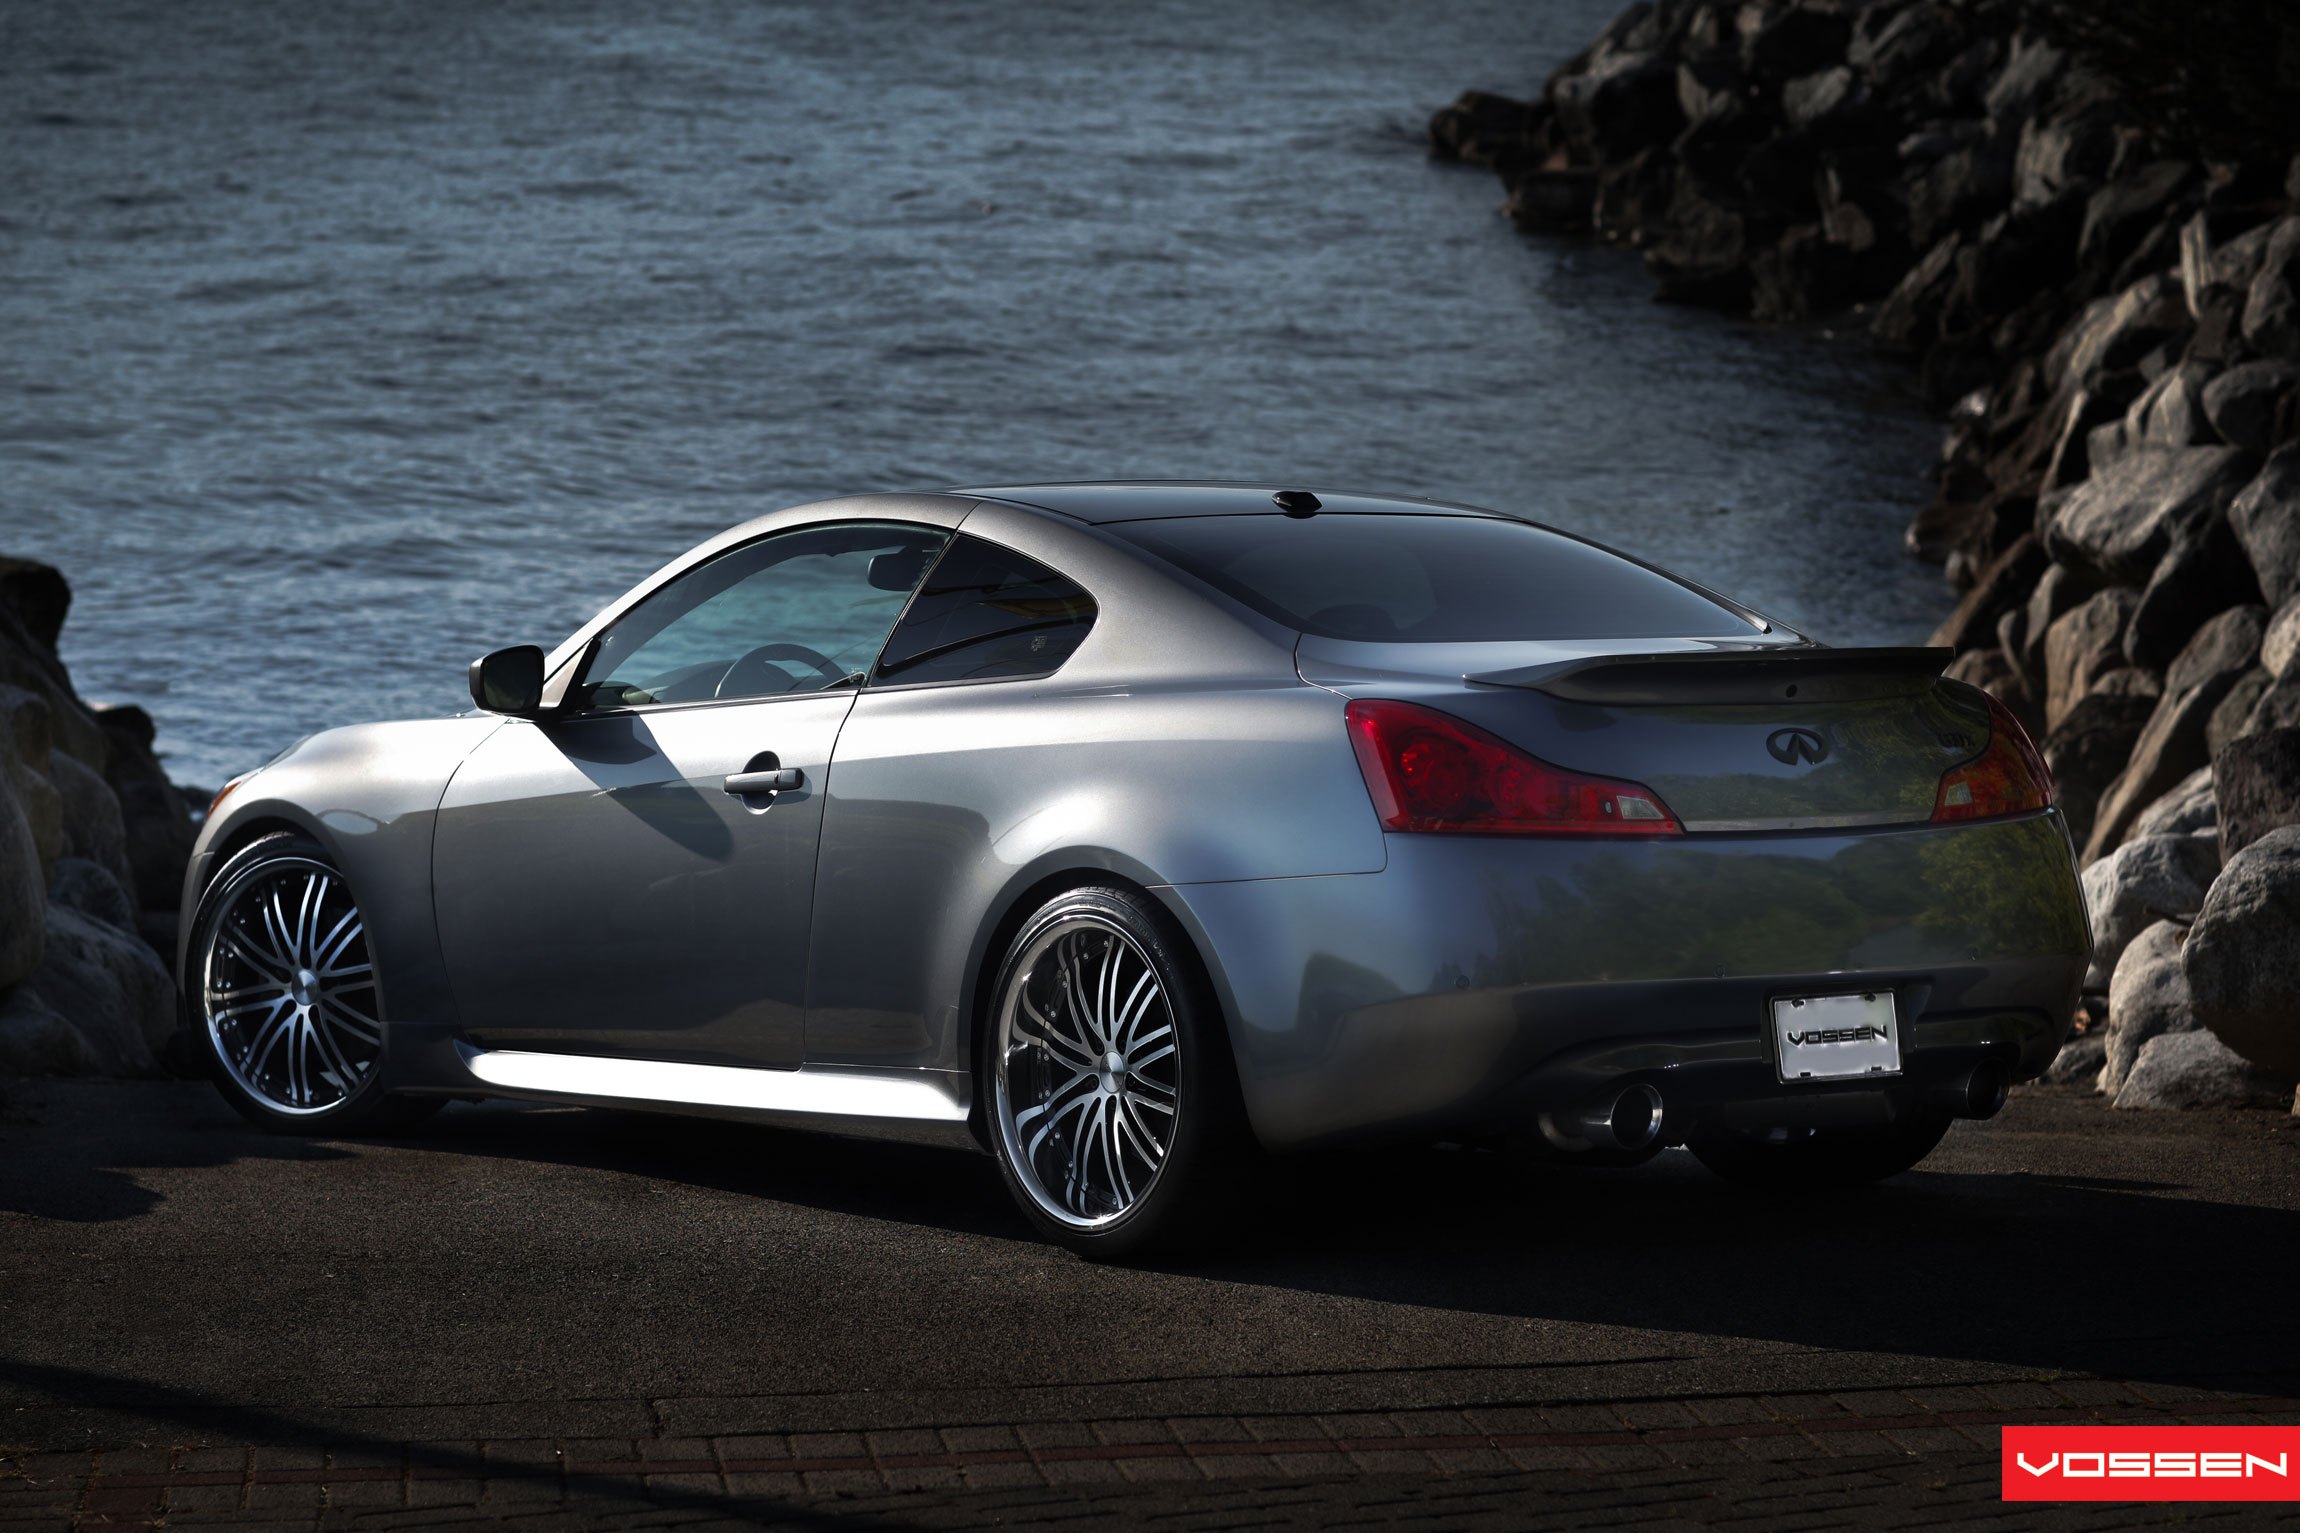 Aftermarket Rear Spoiler on Silver Stanced Infiniti G37 - Photo by Vossen